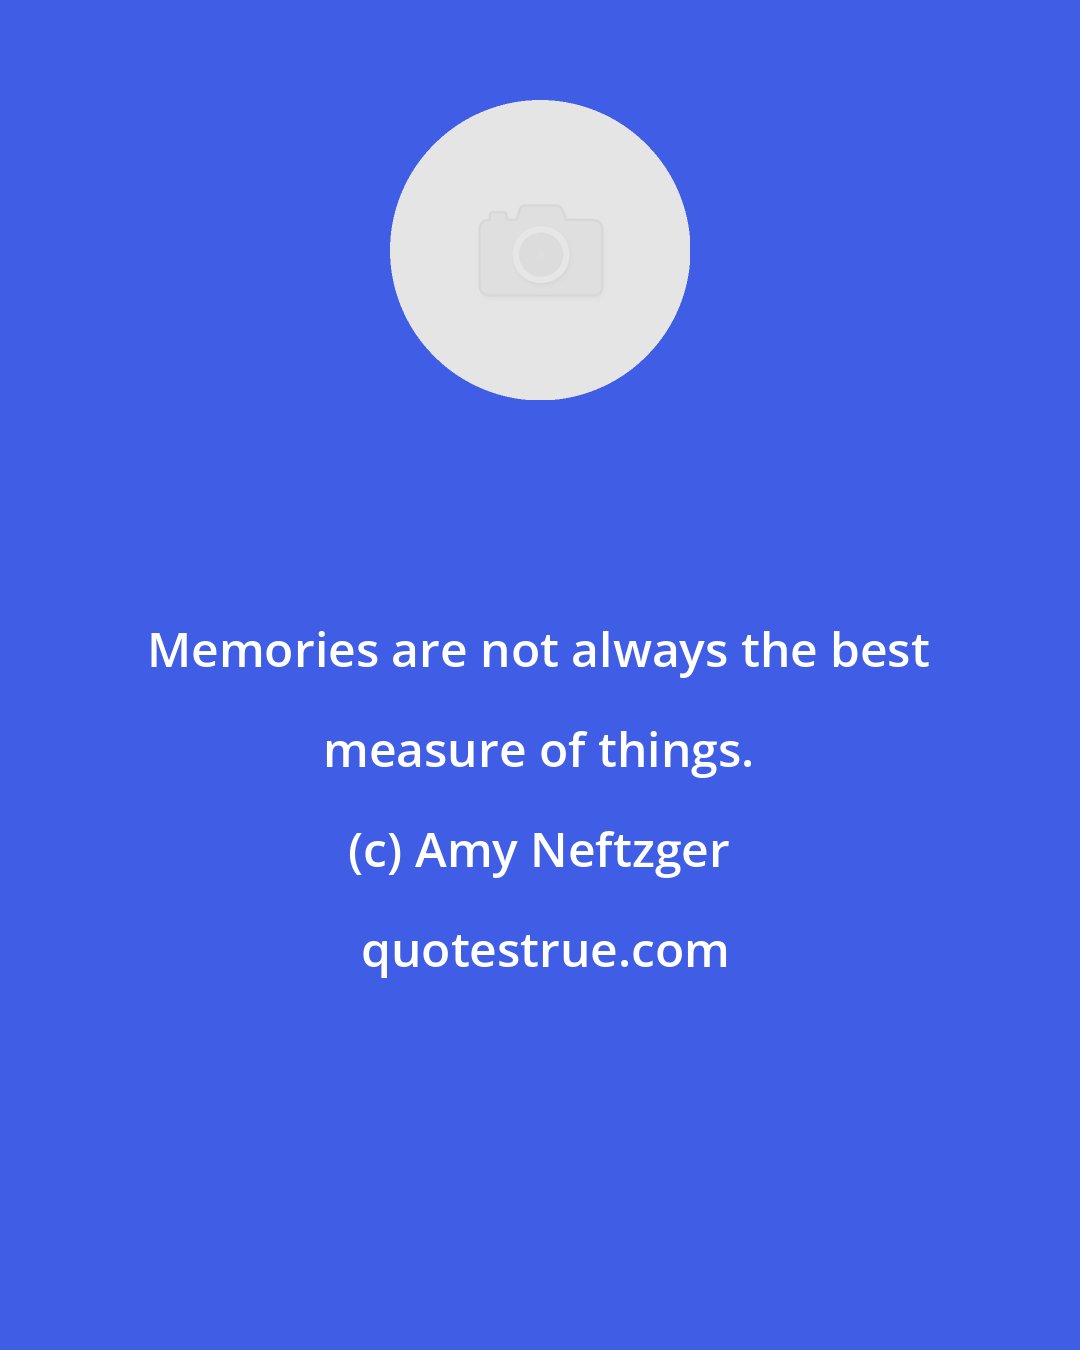 Amy Neftzger: Memories are not always the best measure of things.